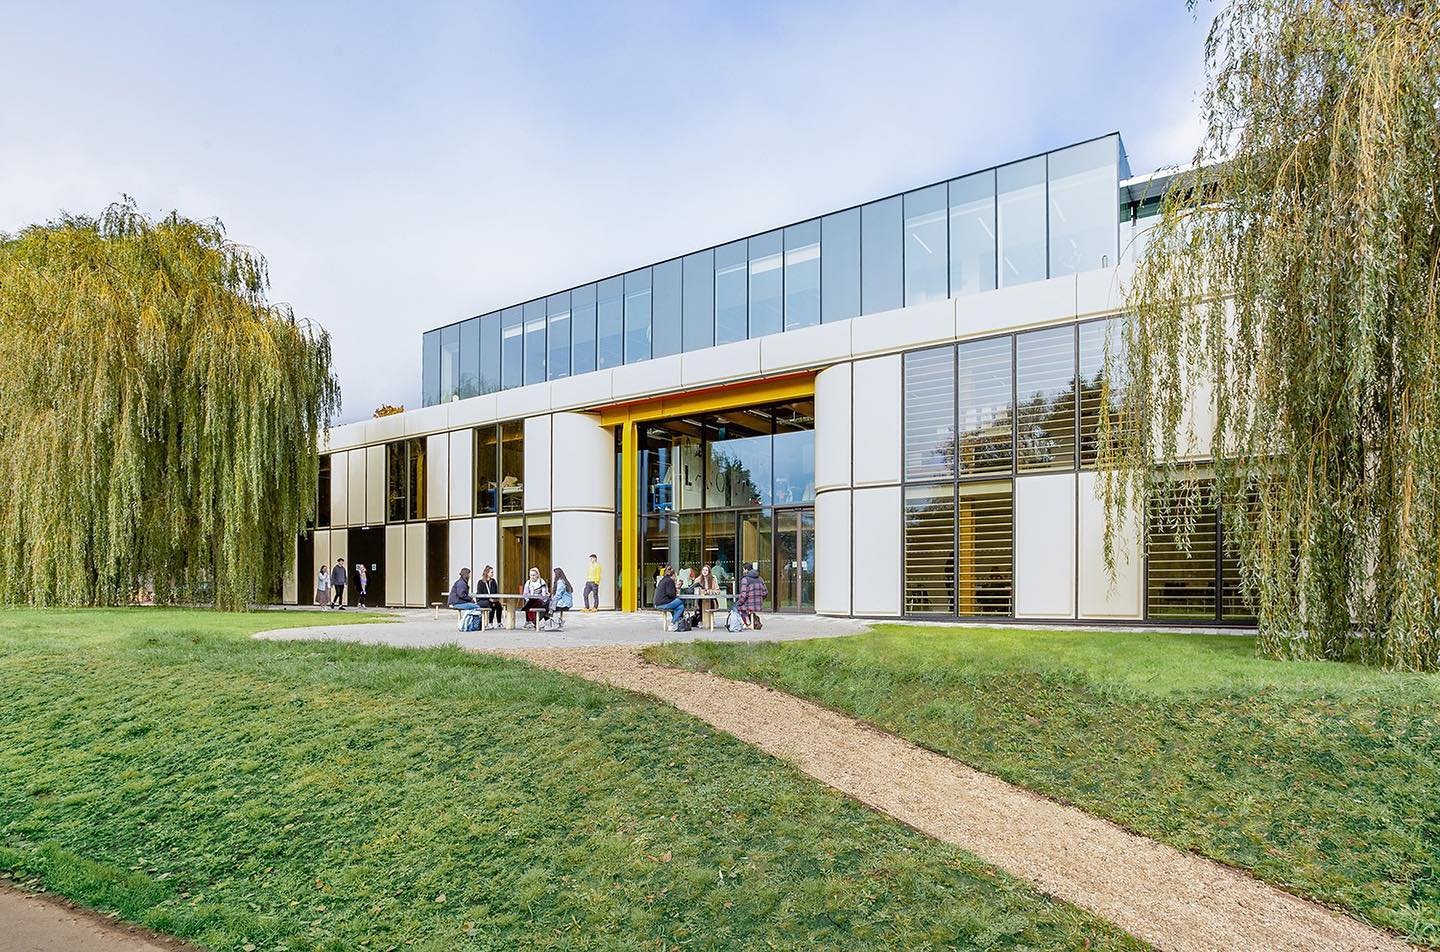 📢Join AIA UK for the next lecture in our Sustainability Series on 8th May, with architect Peter Swallow, Sustainability Lead at Grimshaw, sharing their approach to delivering net zero projects.

In this online lecture, Peter will provide a behind-th